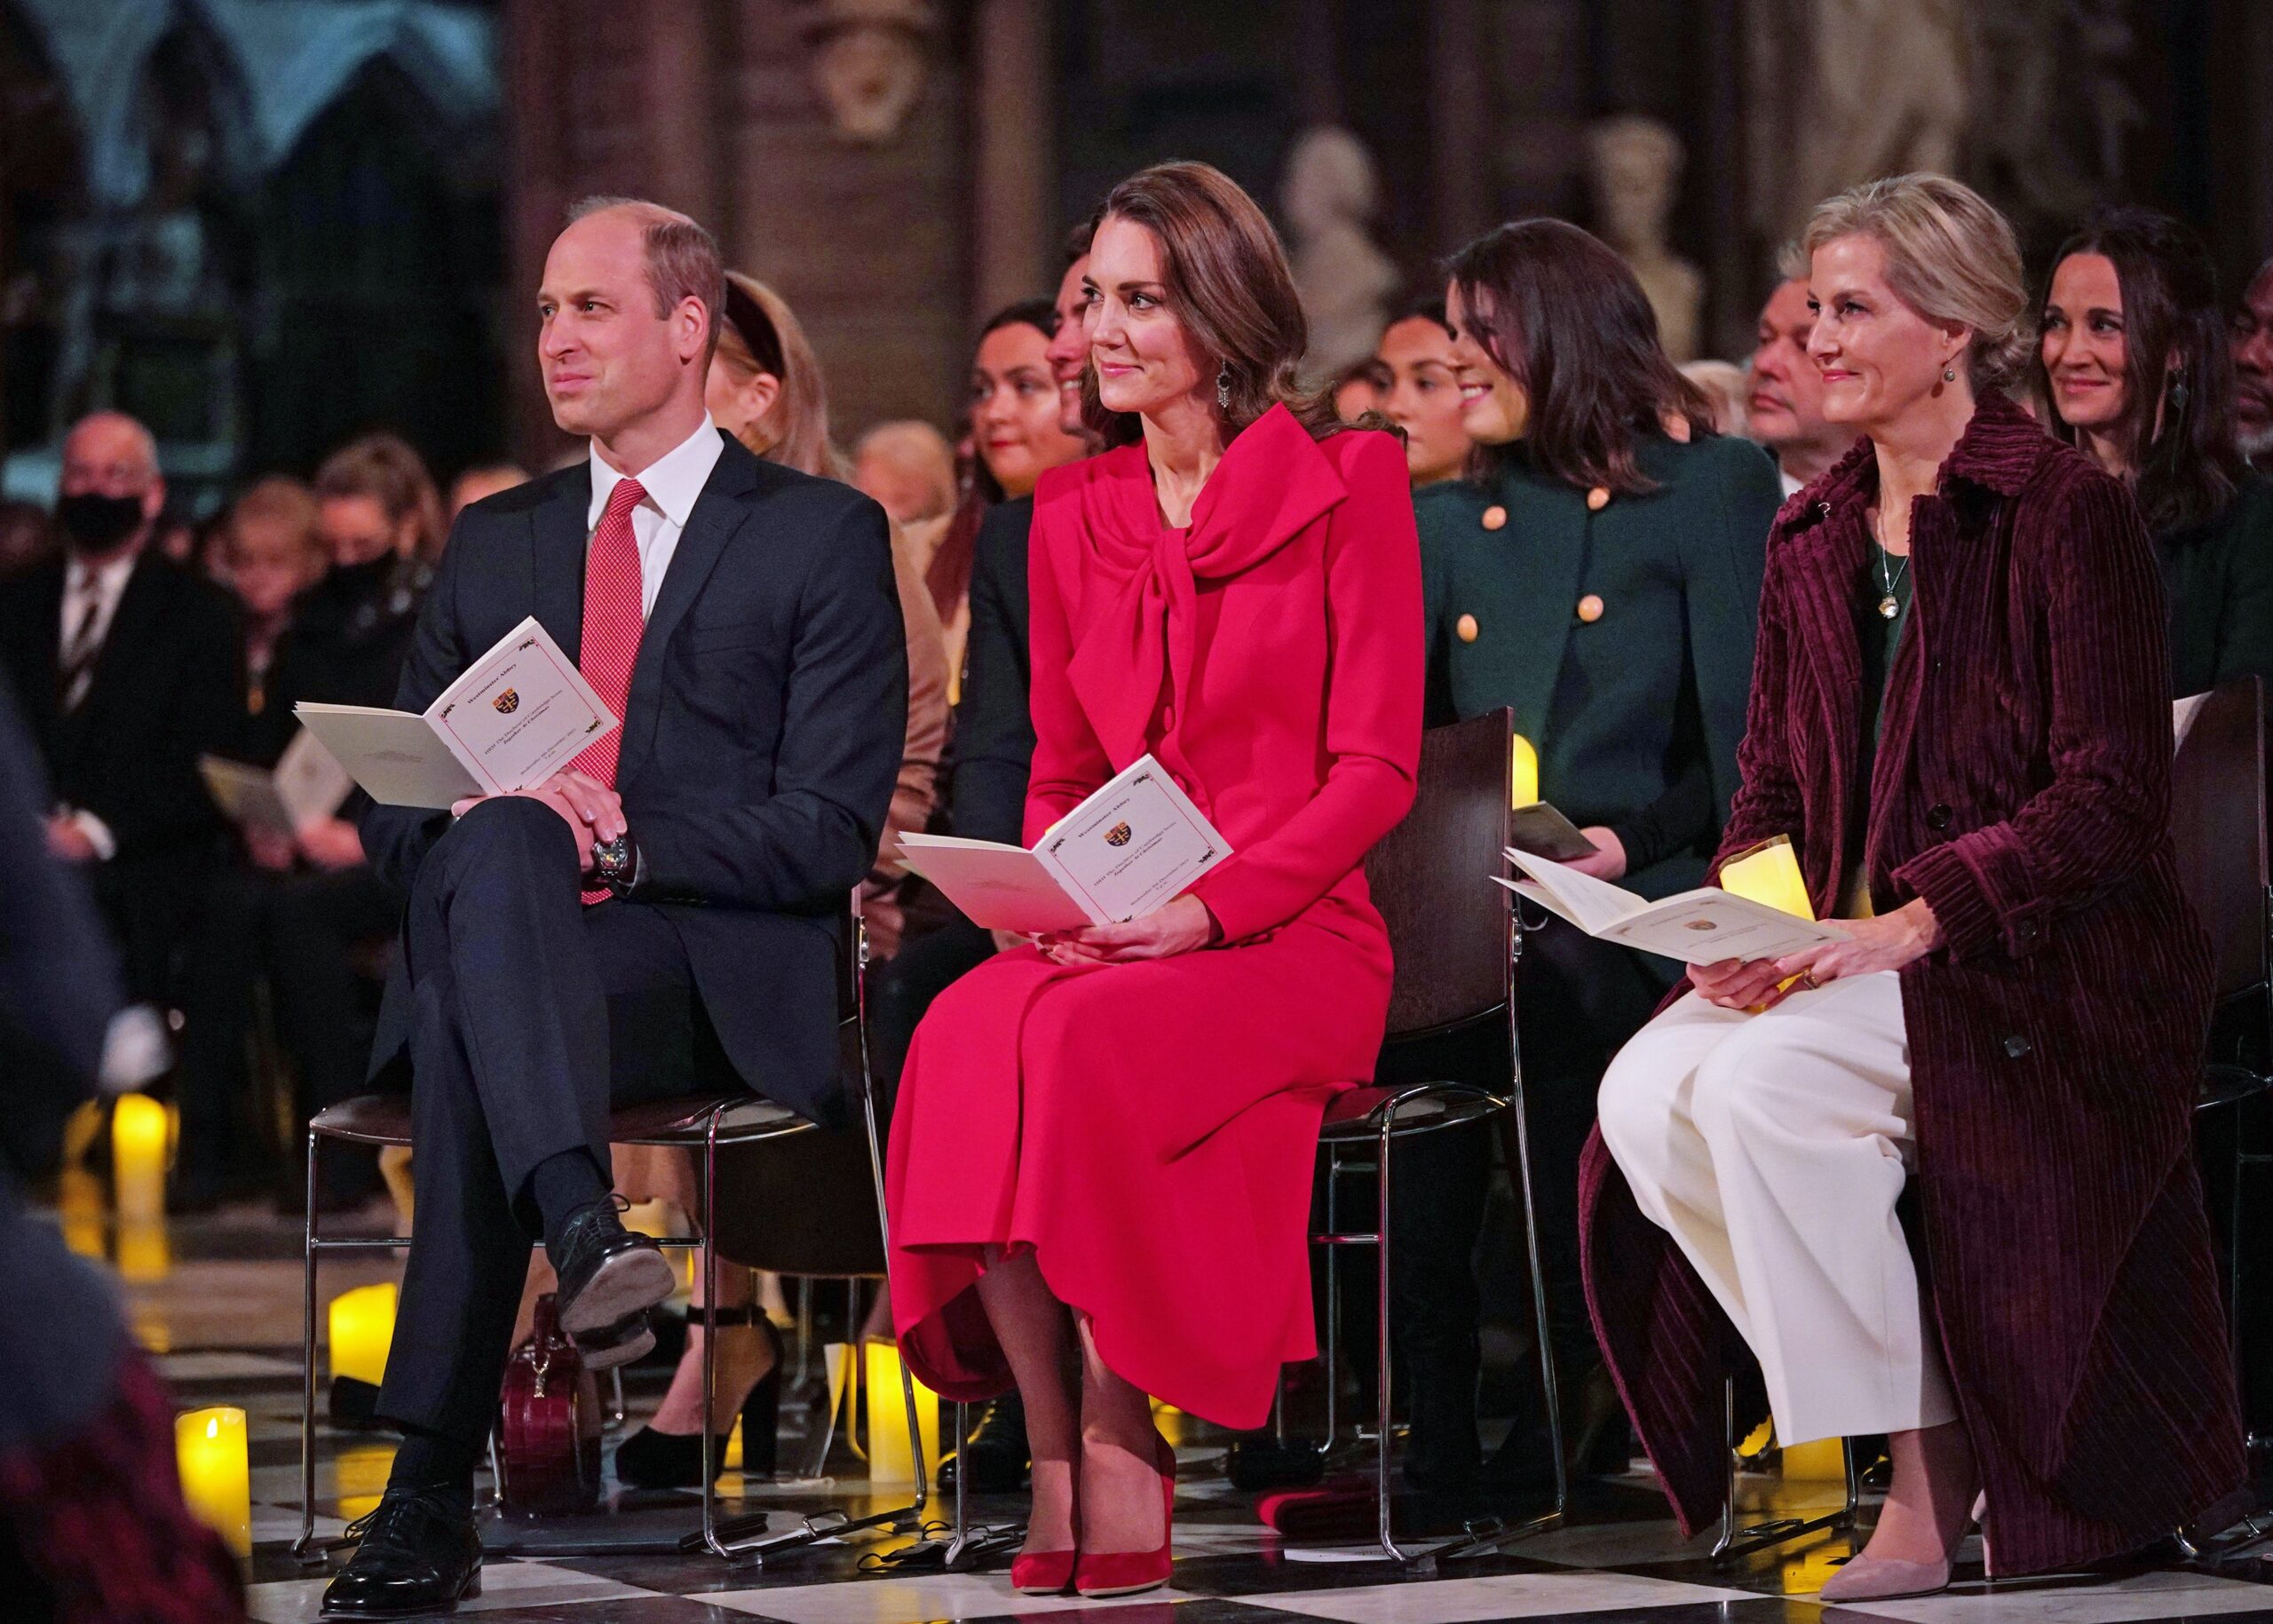 Kate Middleton Debuts a Shock Piano Performance at Her Christmas Concert